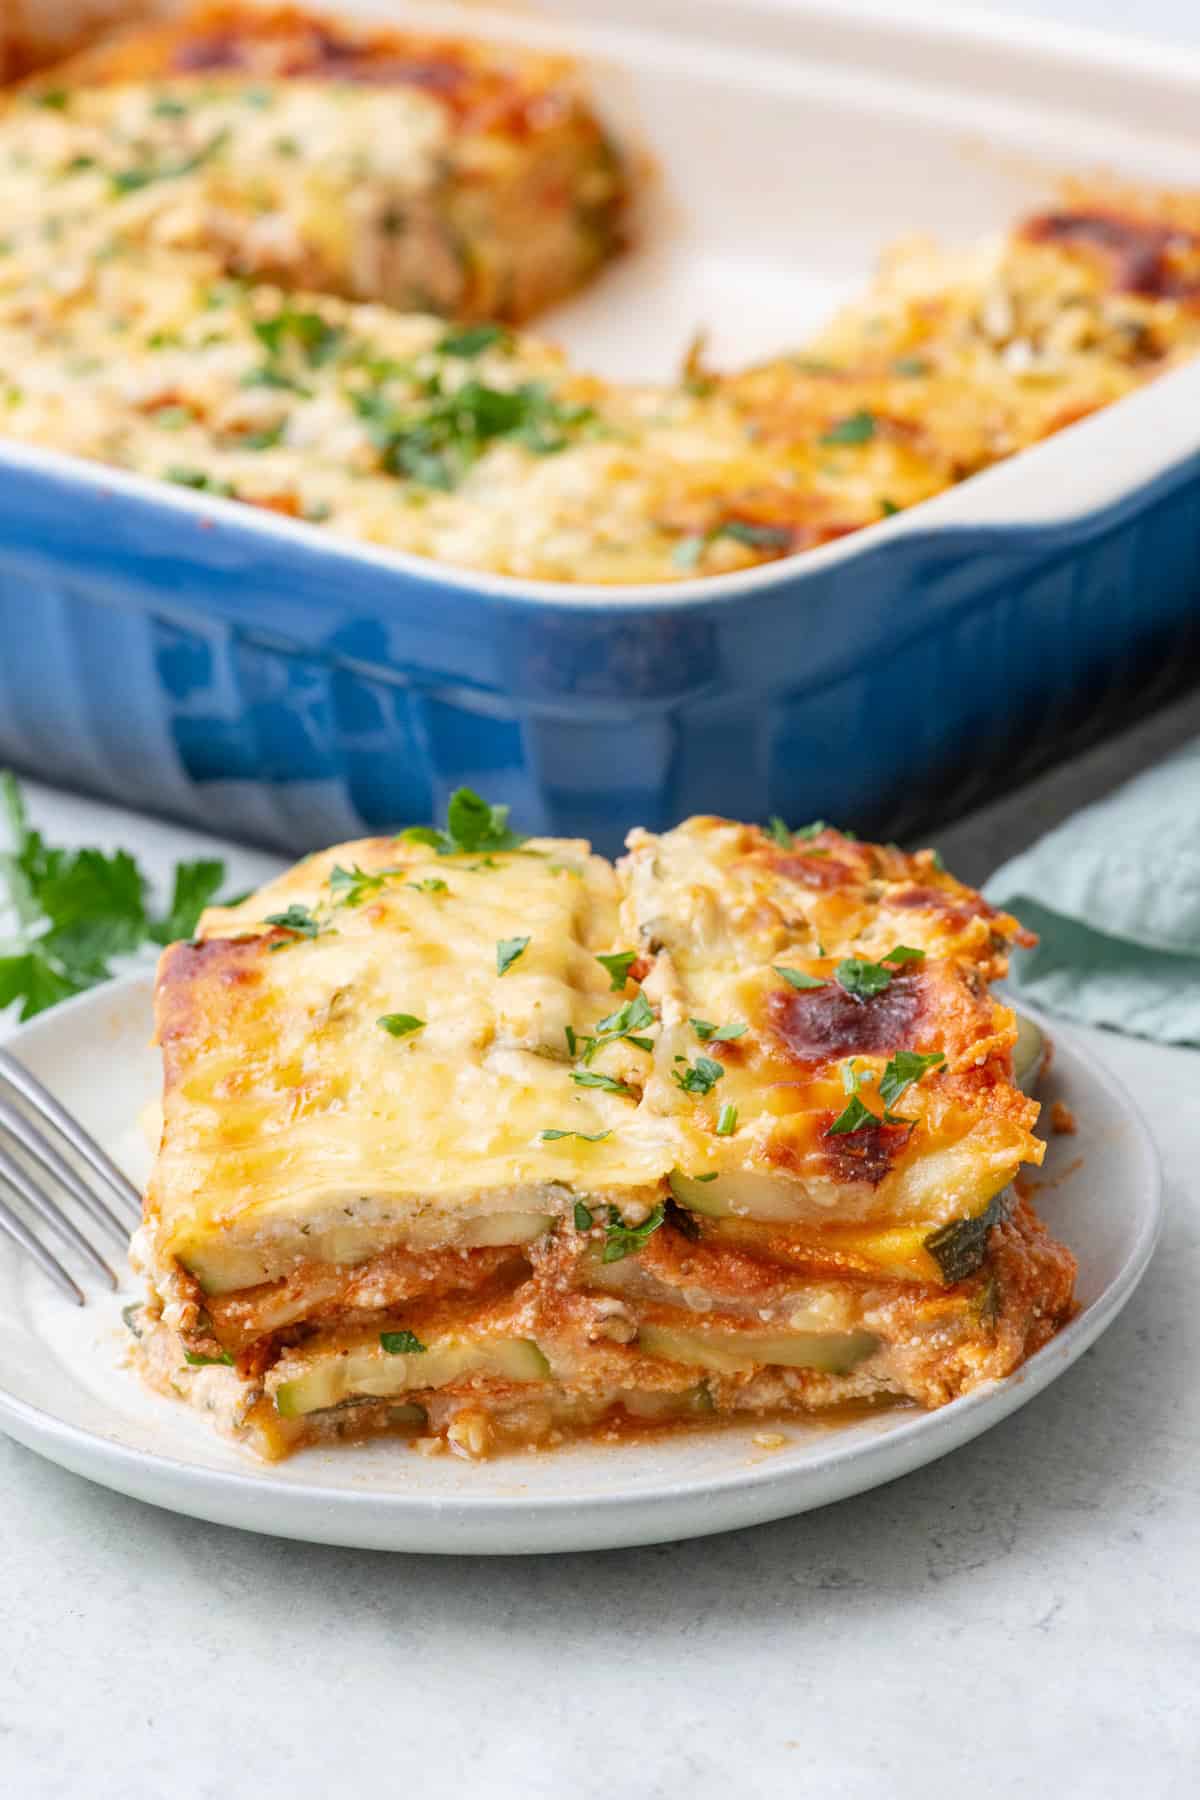 Serving of zucchini lasagna on a small plate to show layers with baking dish of lasagna behind plate showing a serving removed.